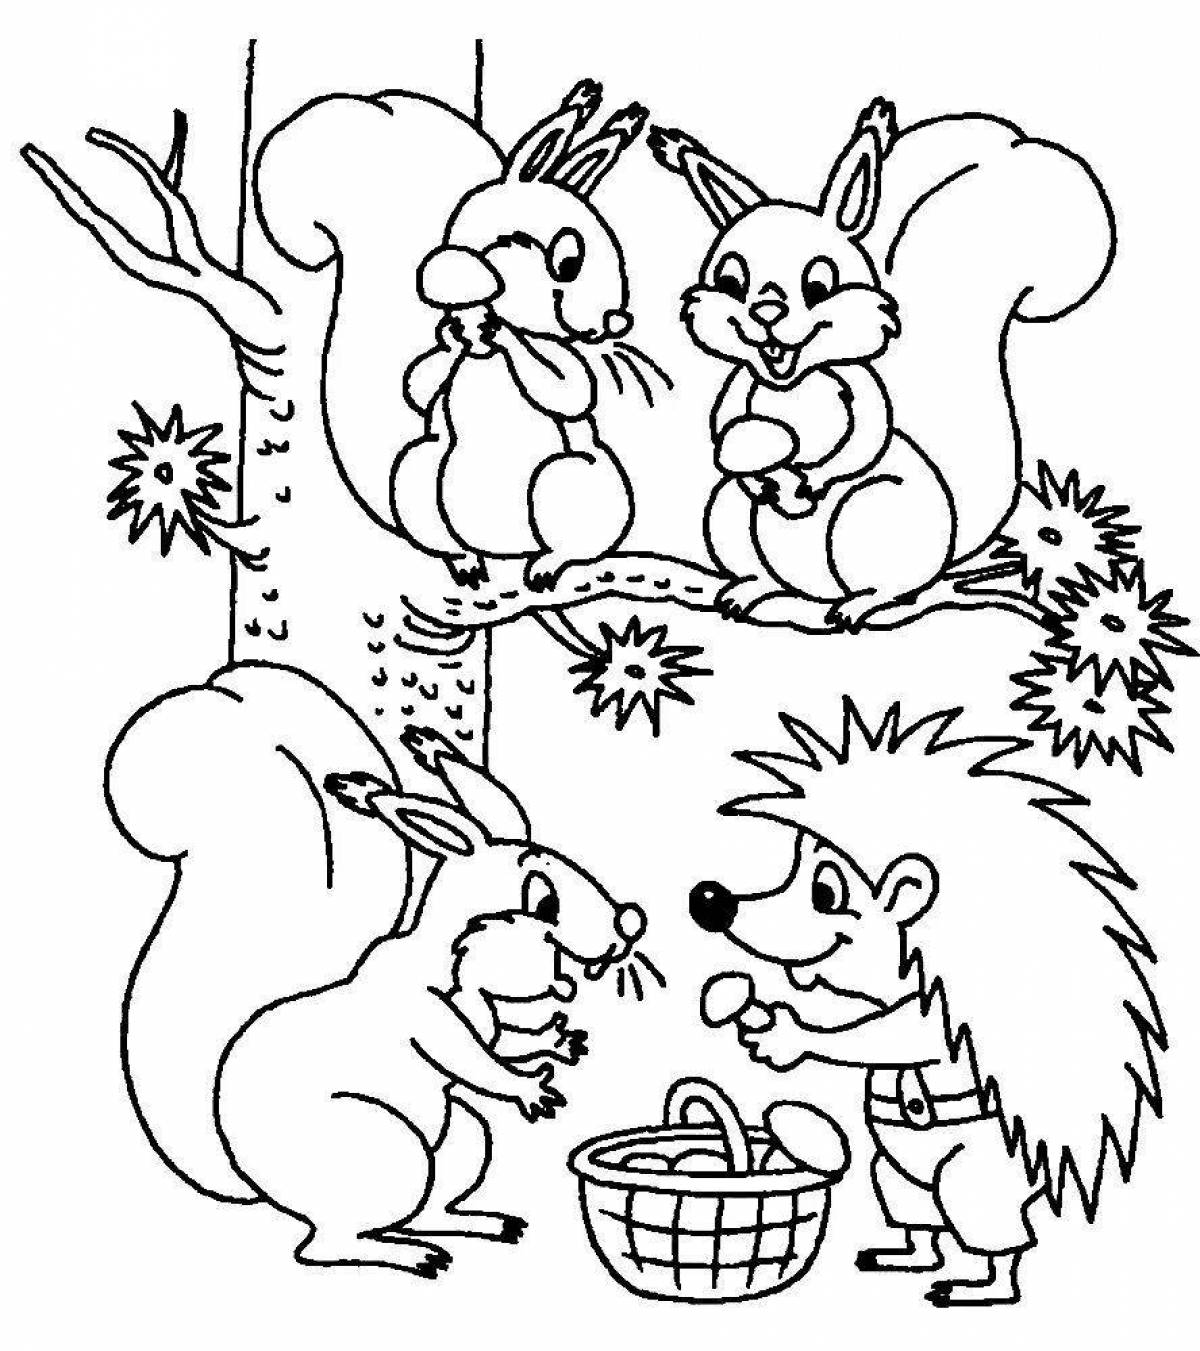 Funny forest animal coloring book for 6-7 year olds